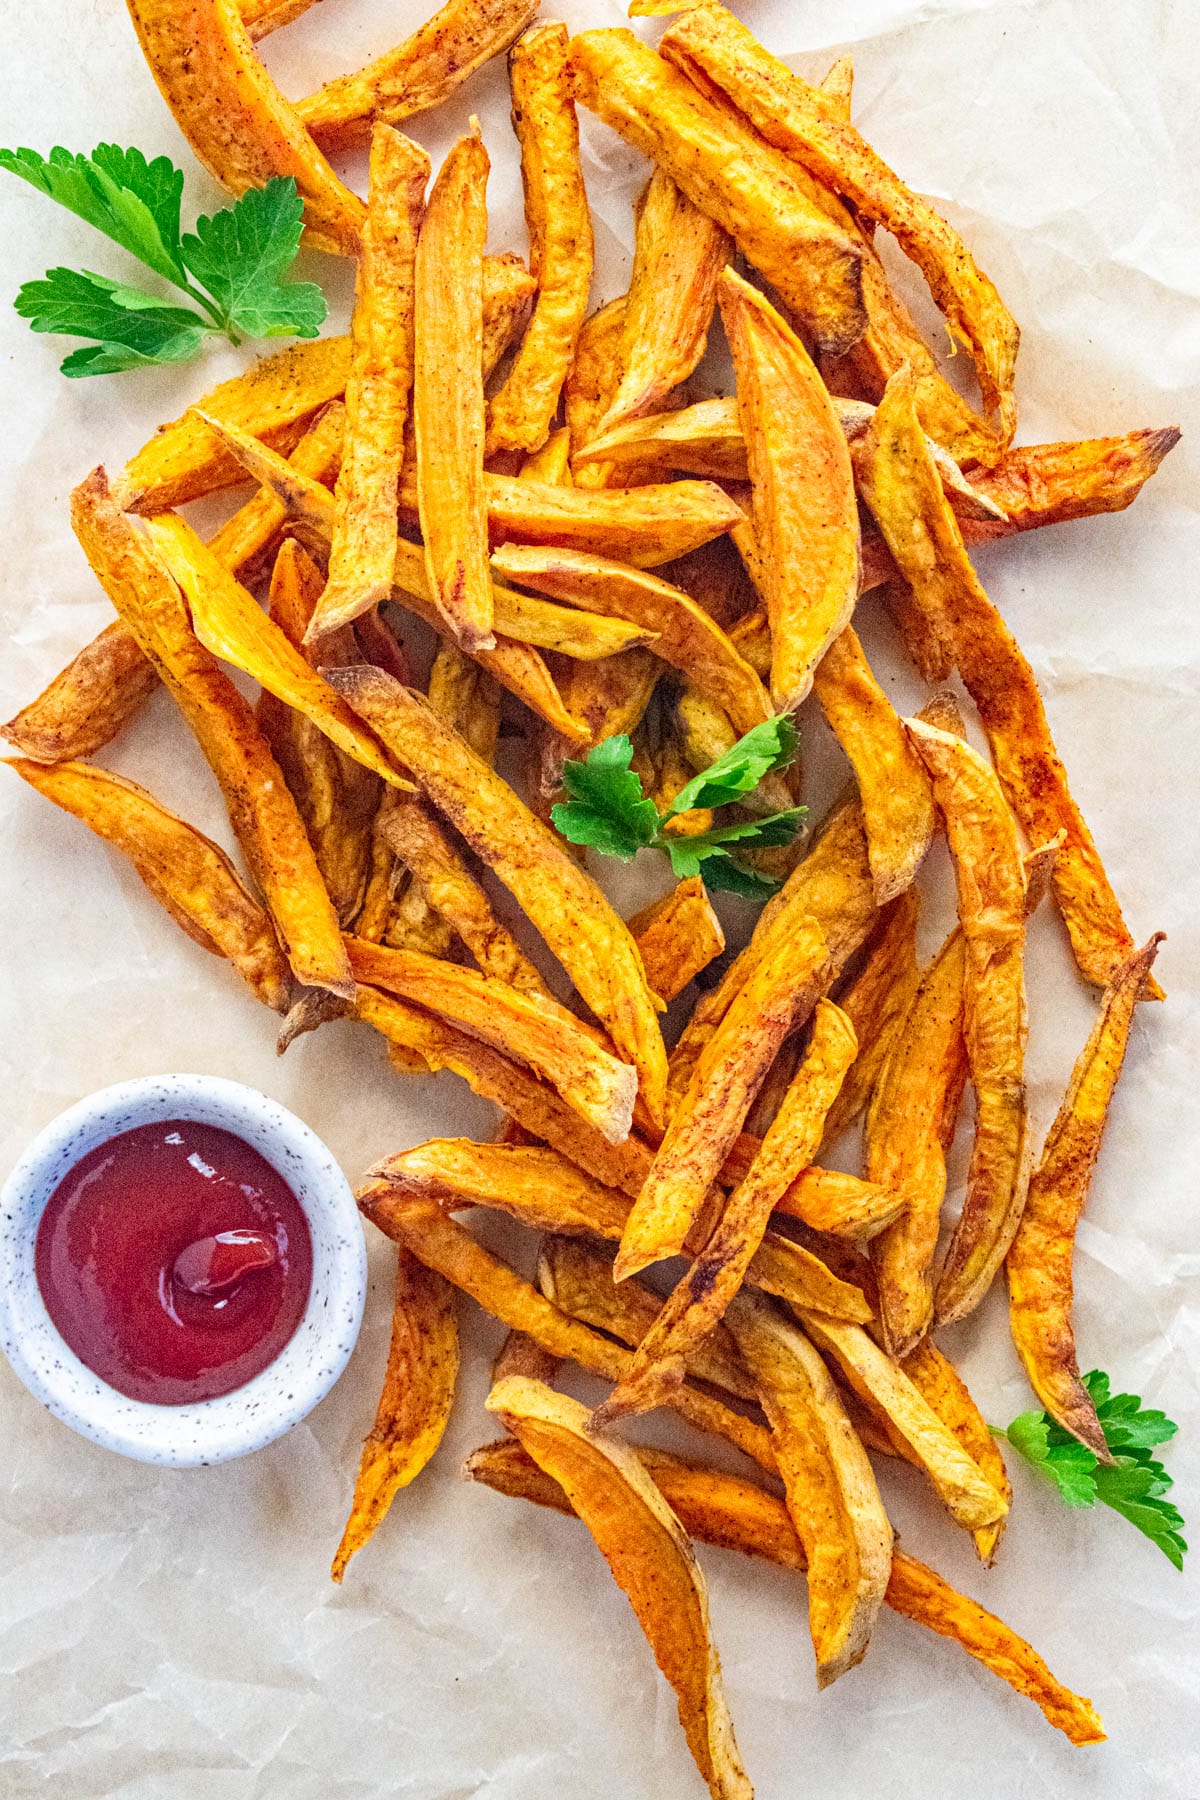 A birds-eye view of crispy air fryer sweet potato fries on a piece of parchment paper with parsley scattered on top and a side of ketchup.